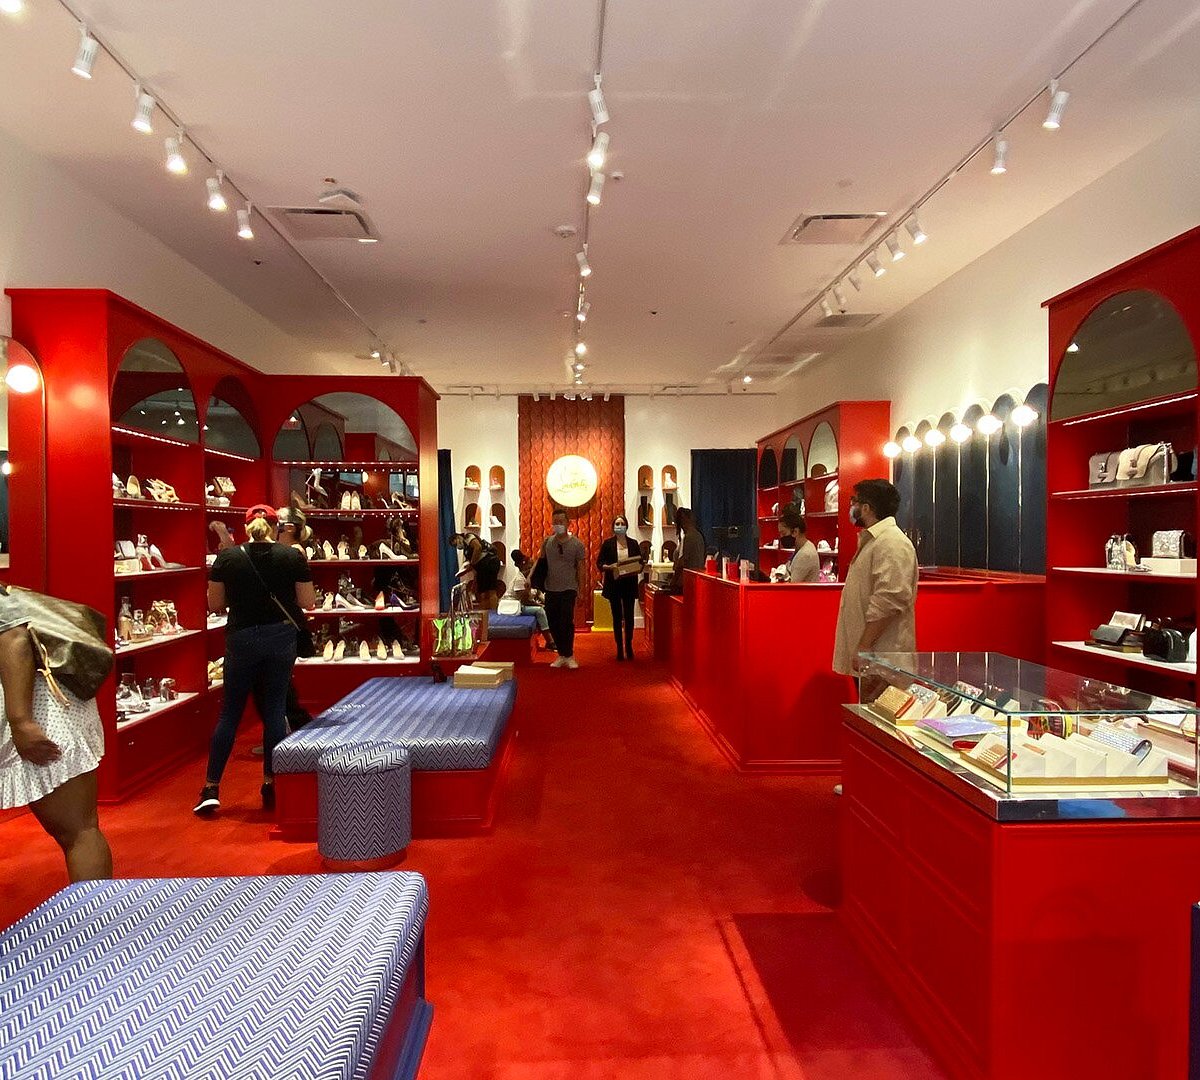 Christian Louboutin Outlet (Cabazon) 2022 All You Need to Know BEFORE You Photos) - Tripadvisor